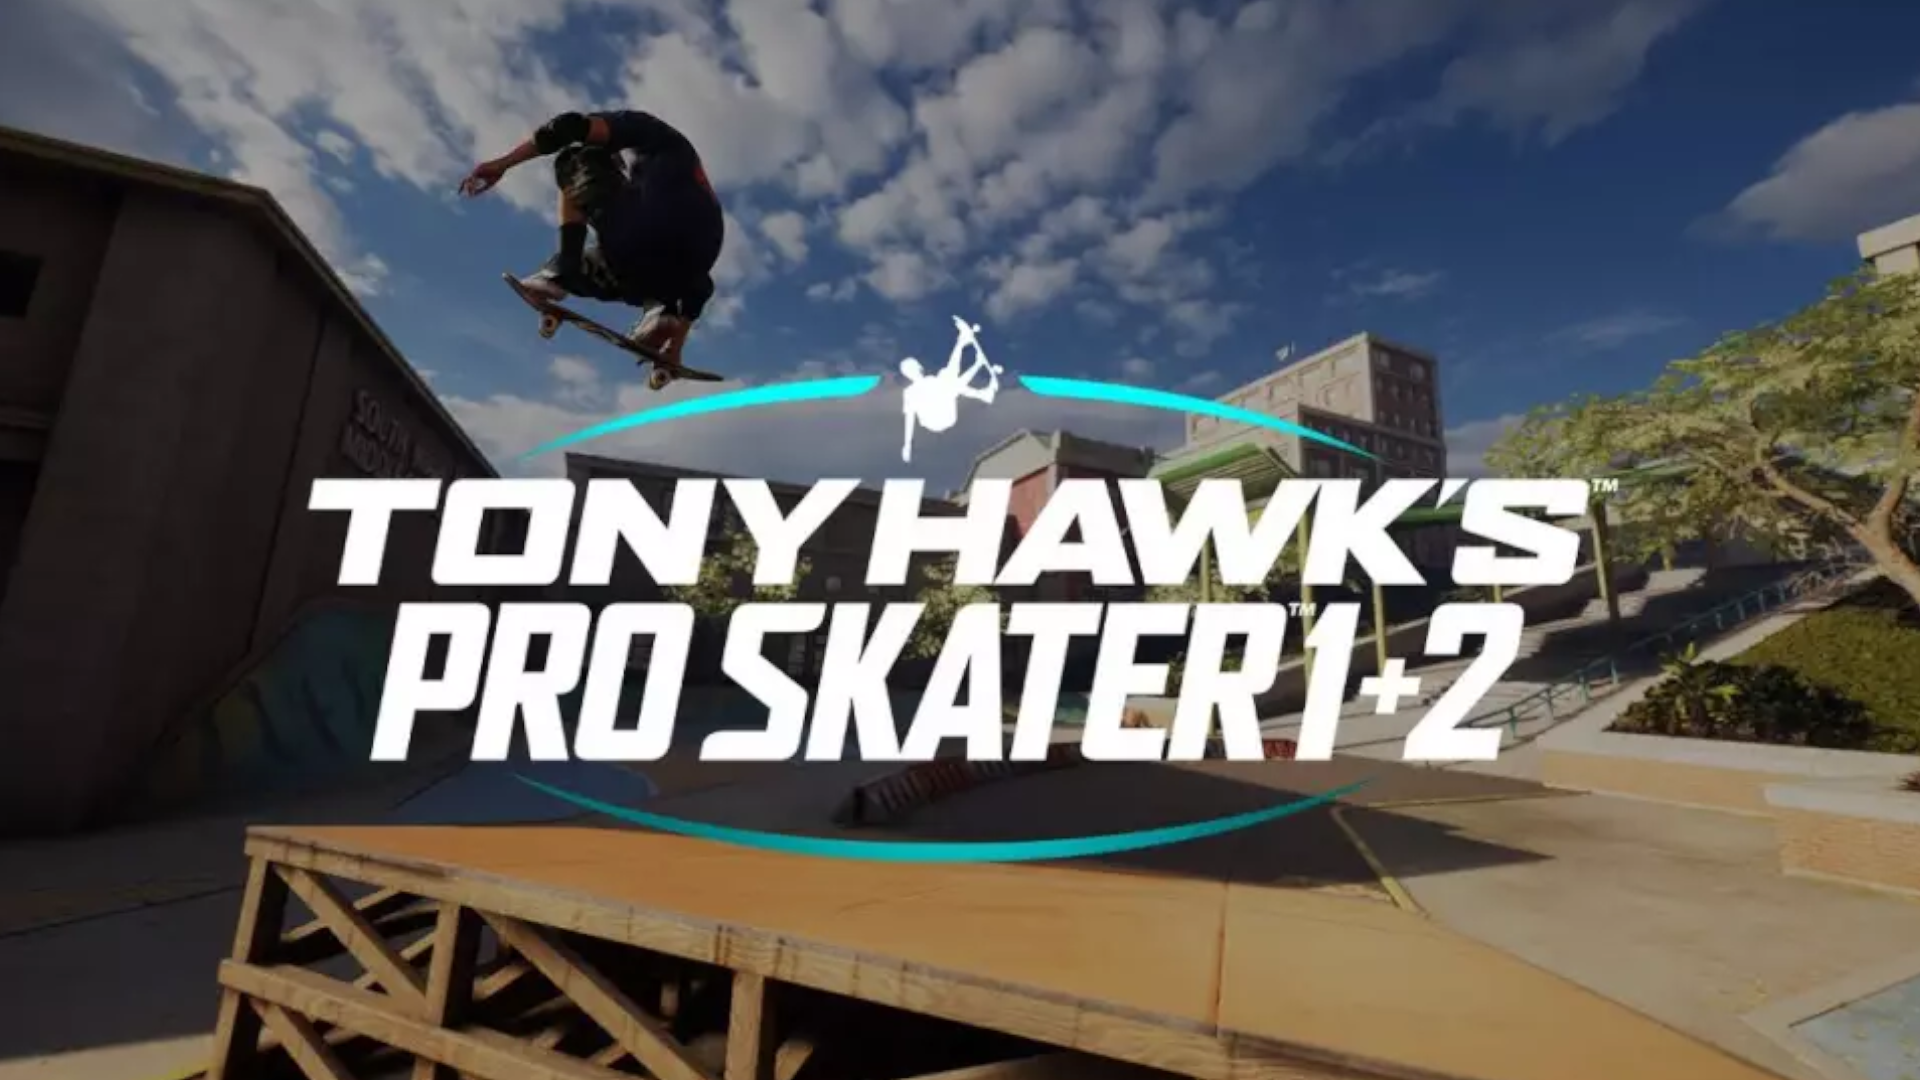 Tony Hawk's Pro Skater 1 + 2 remake has been announced Let's talk about video games